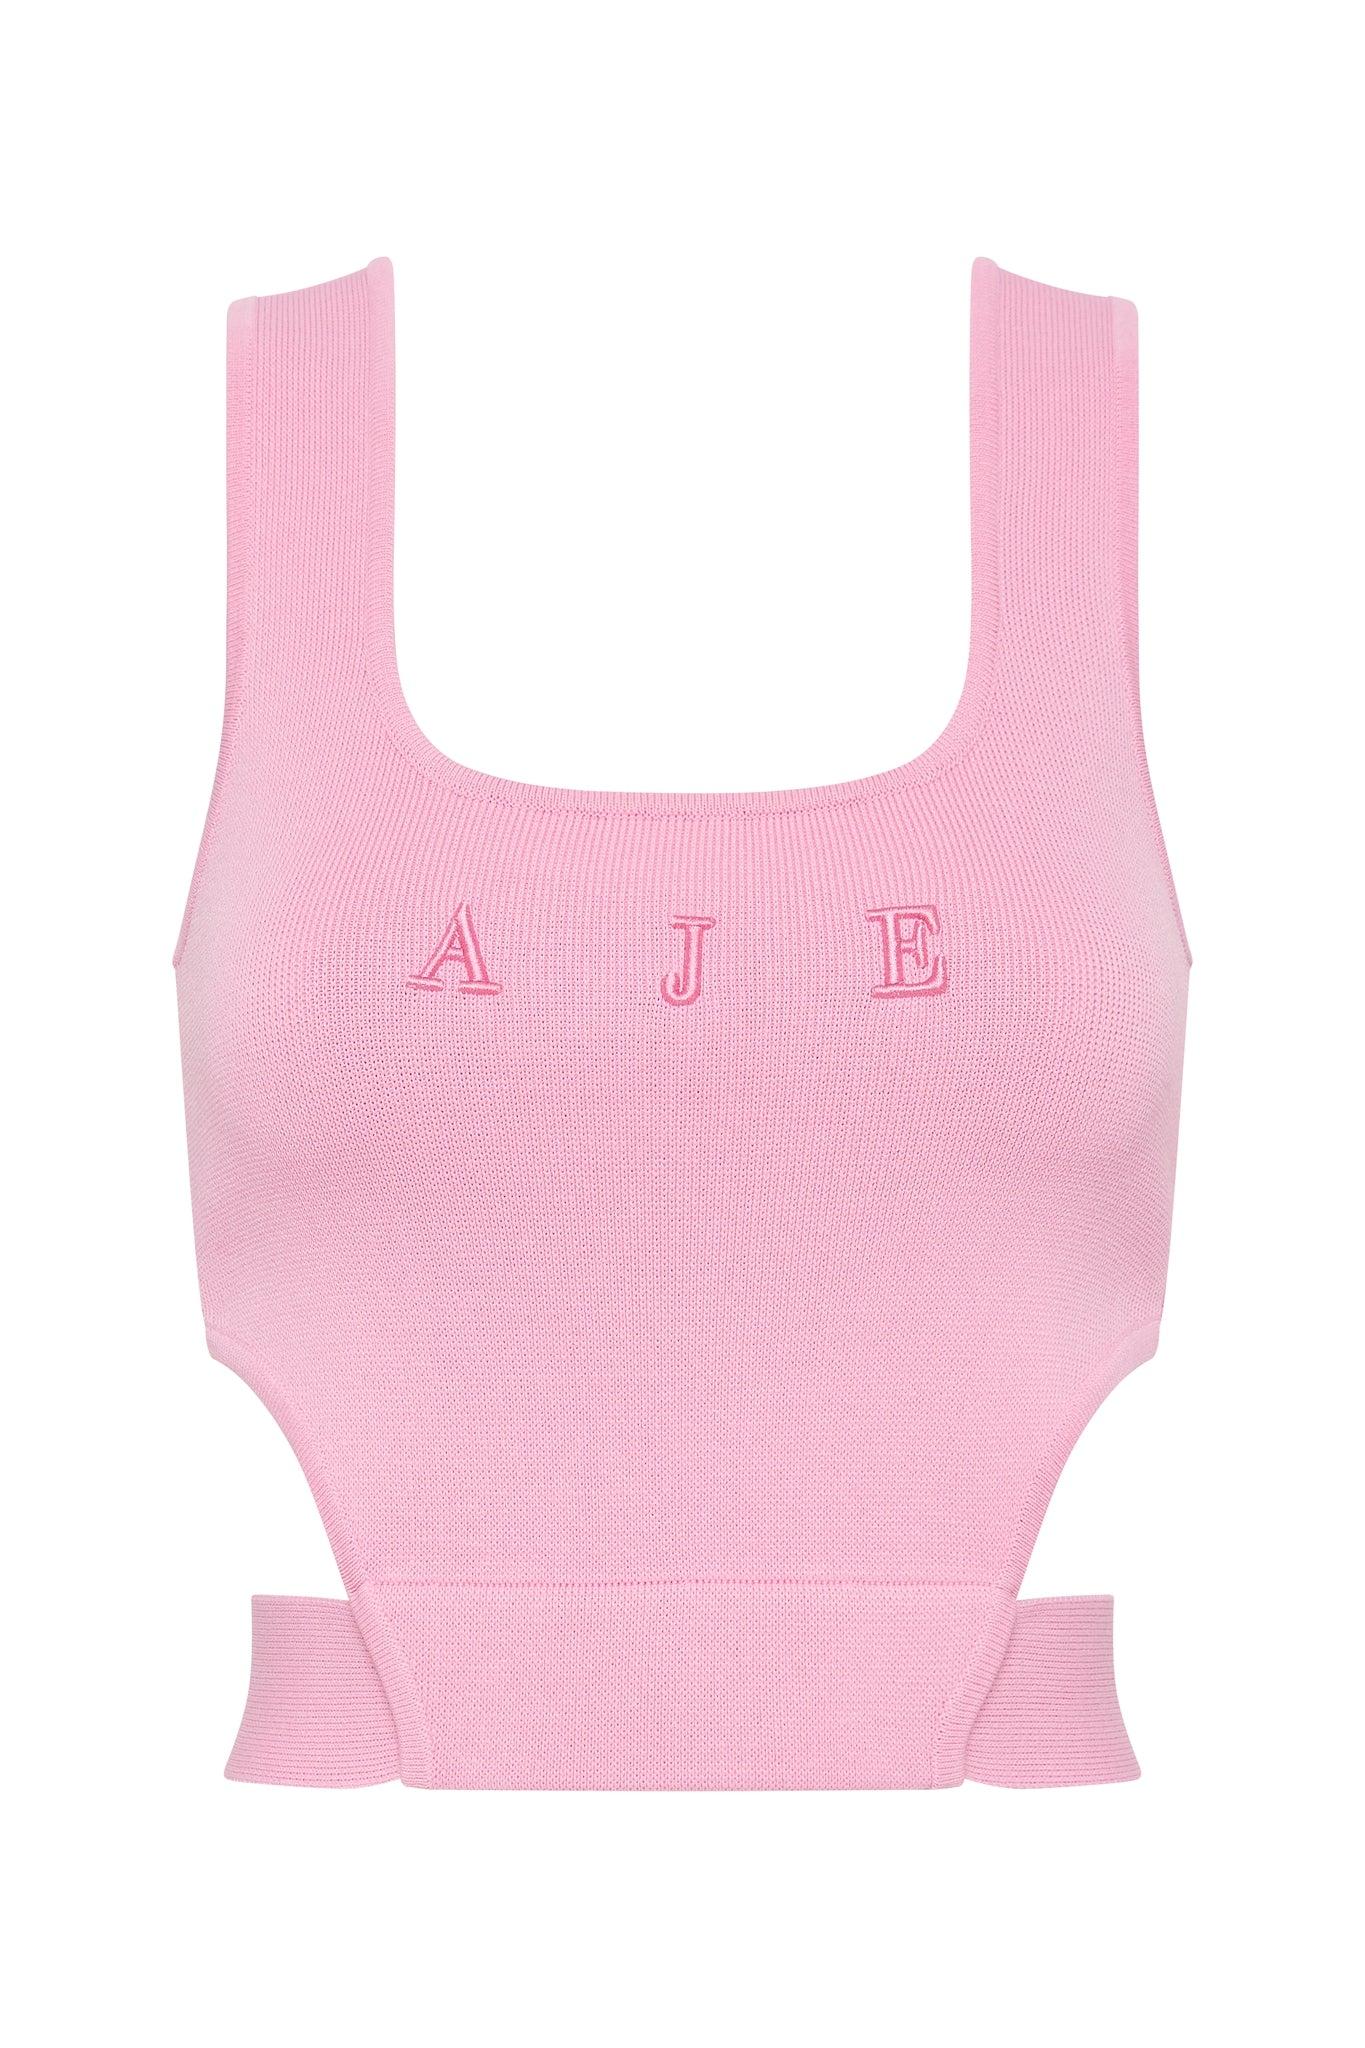 Aje. Livadi Cropped Tie Knit Logo Top in Pink | Lyst